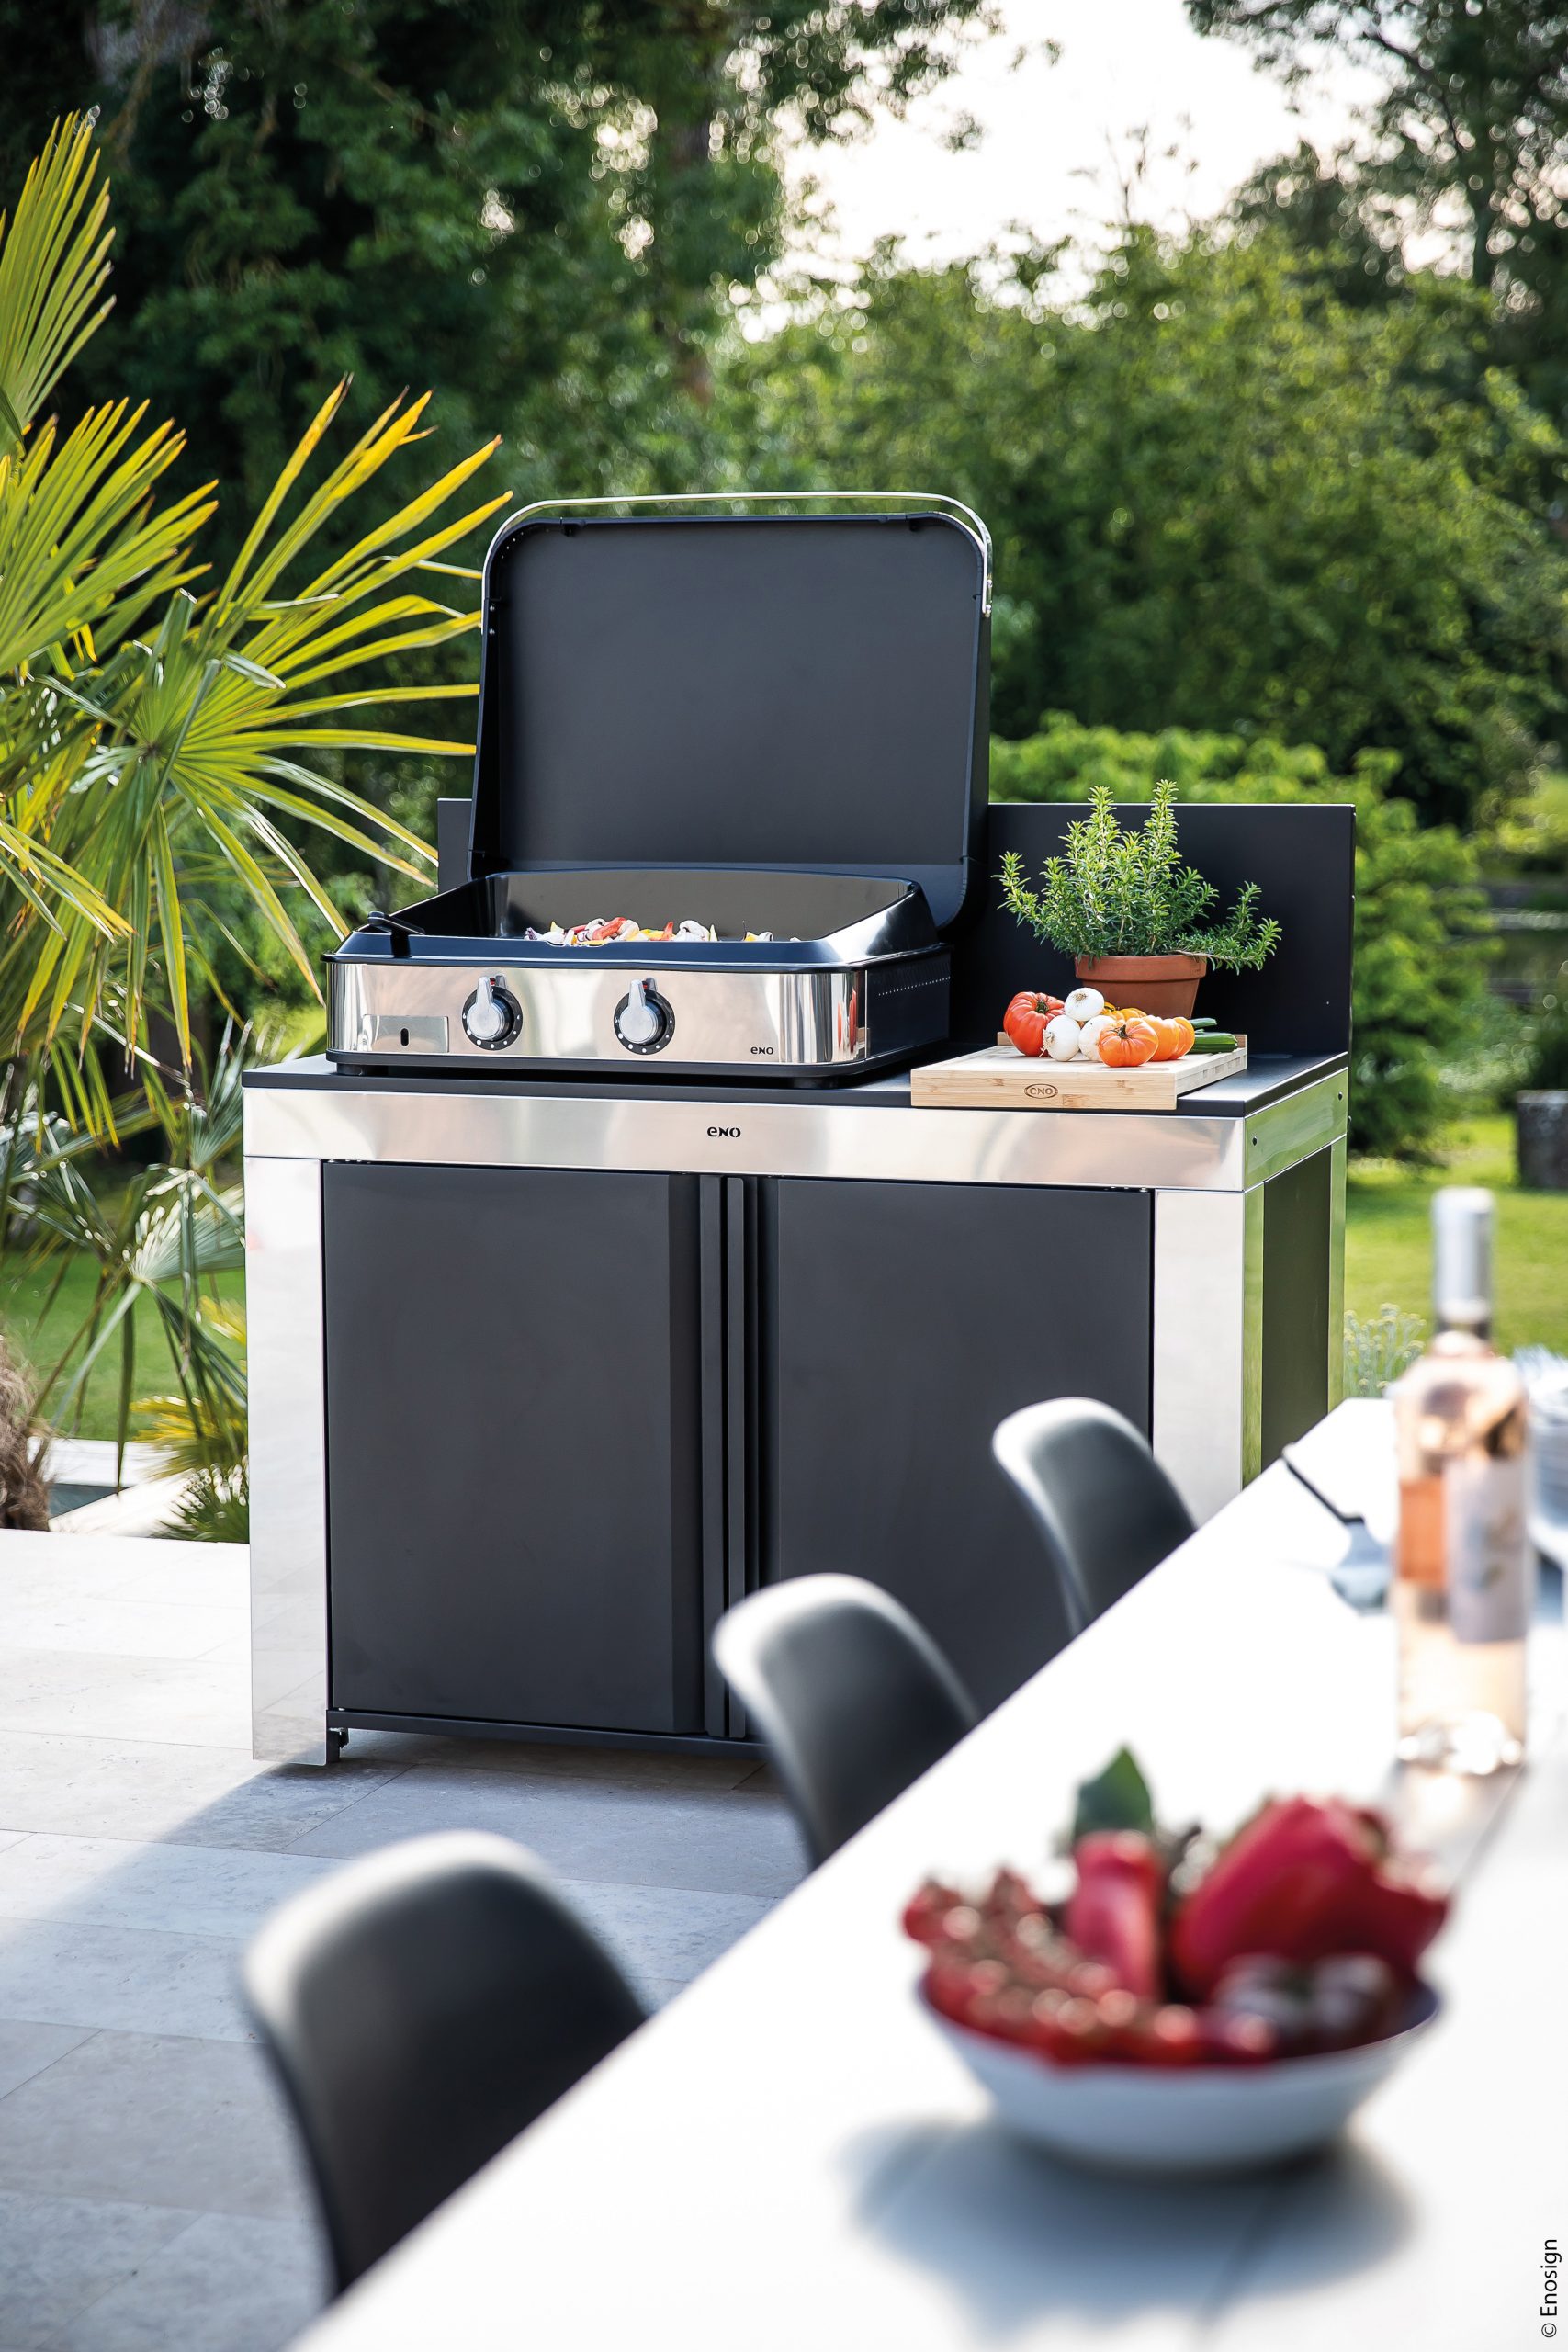 Grill, barbecue, plancha… comment choisir ?